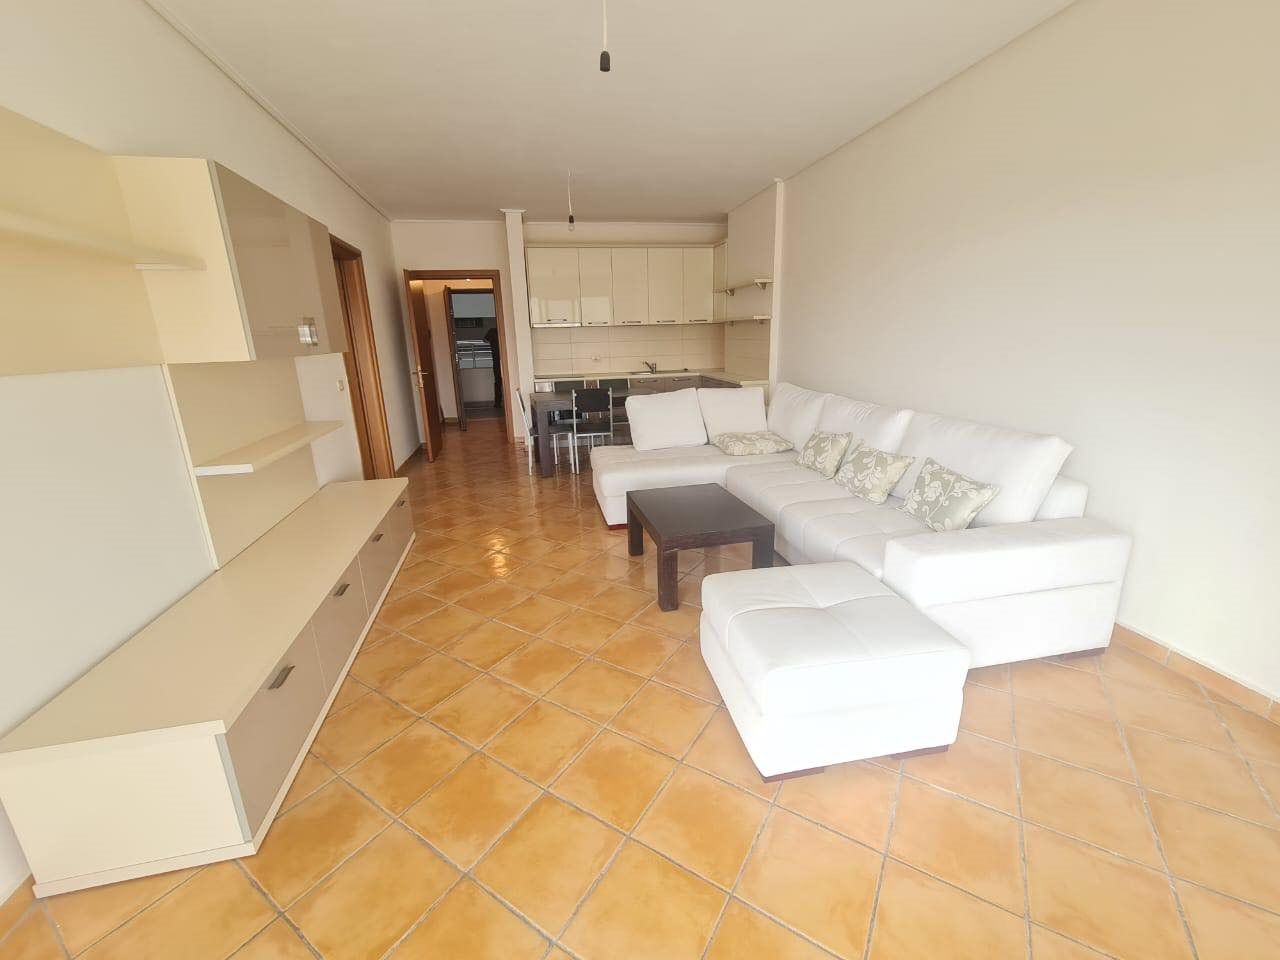 Two Bedroom Apartment For Sale In Saranda Albania In A Good Conditions Well Furnished With A Great Location In The City Center 